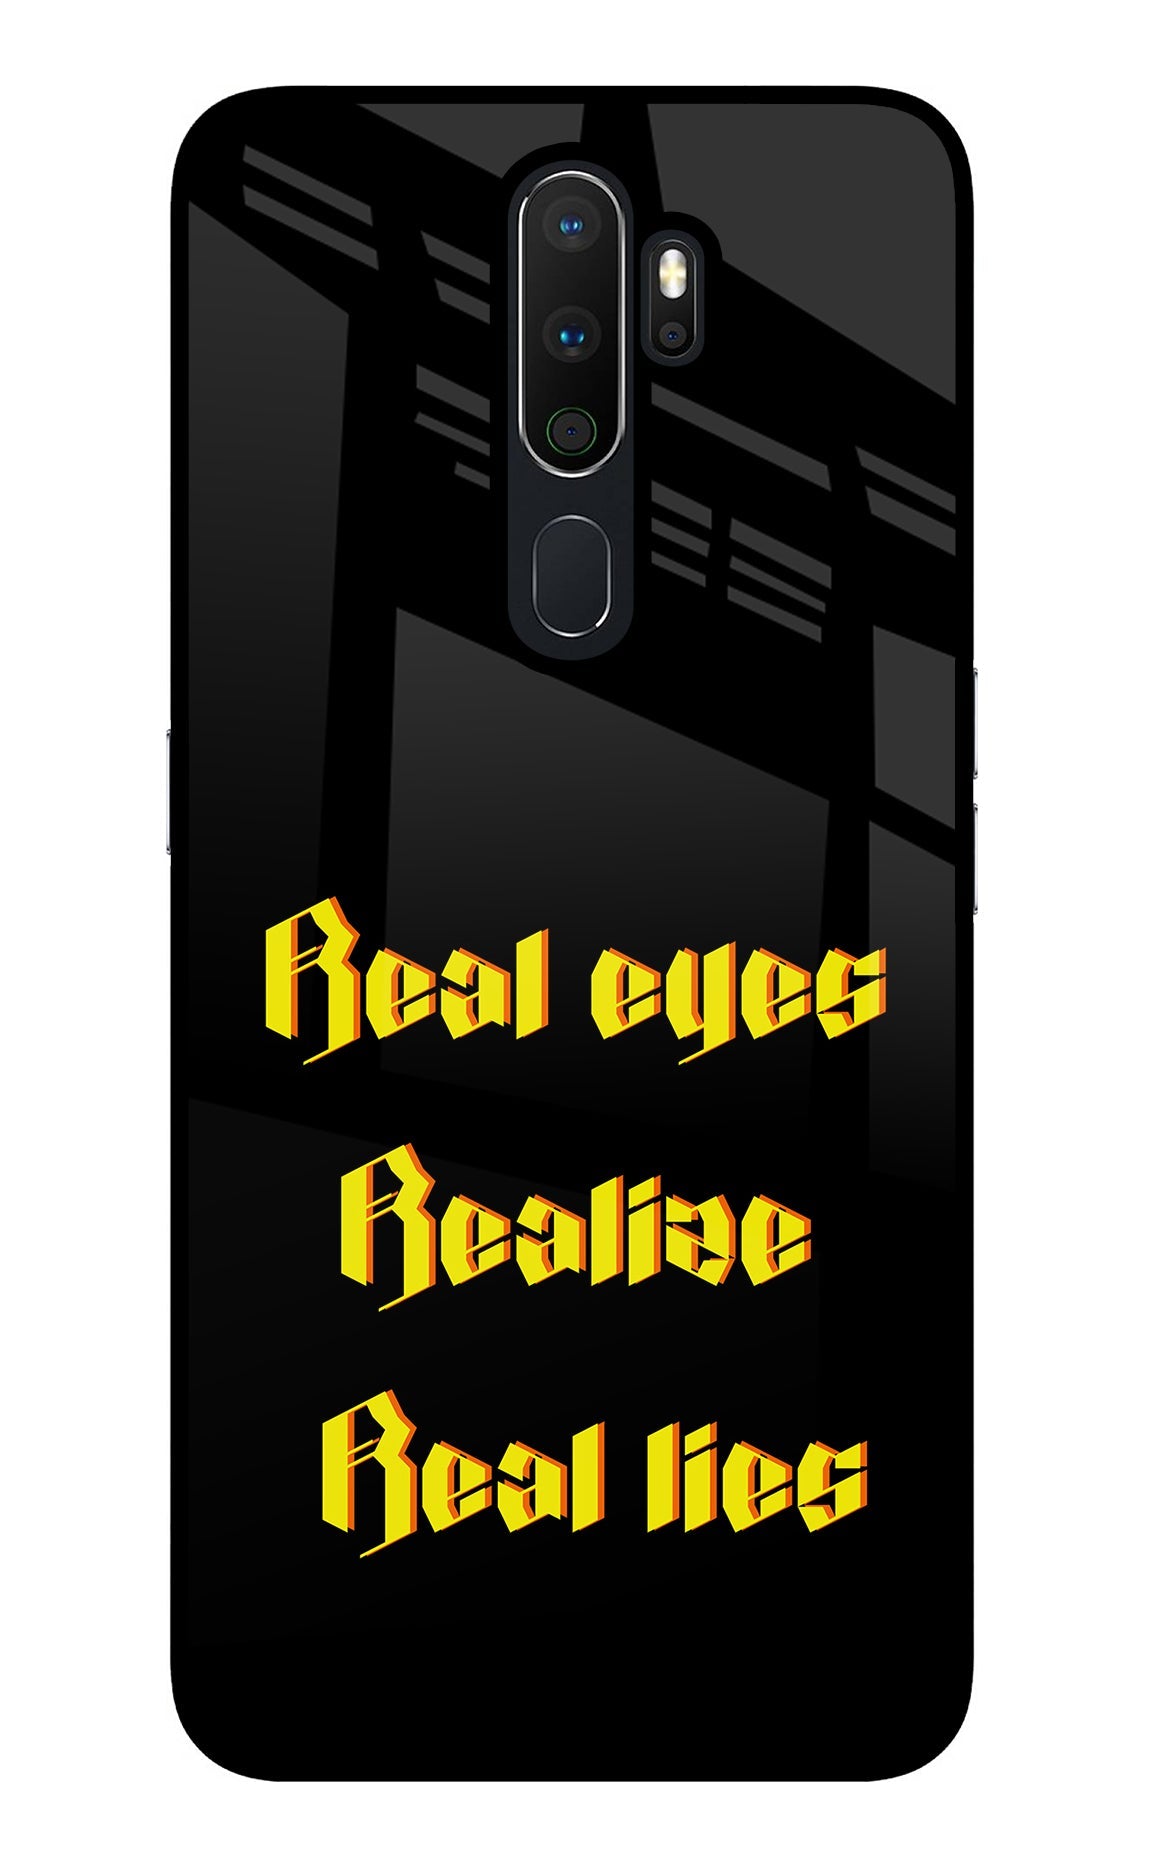 Real Eyes Realize Real Lies Oppo A5 2020/A9 2020 Glass Case